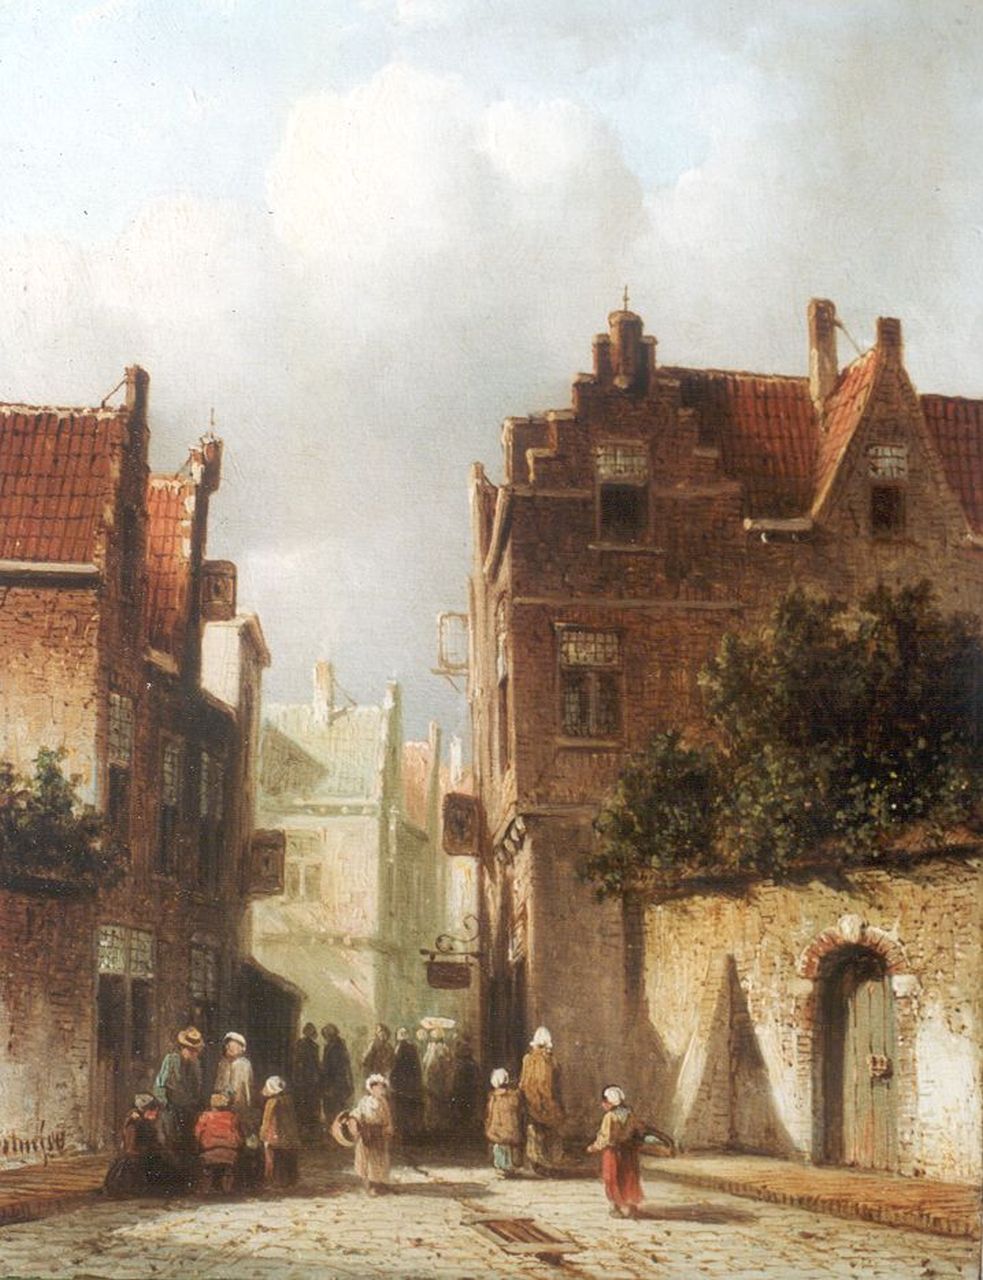 Vertin P.G.  | Petrus Gerardus Vertin, A Dutch town with figures in a street, oil on panel 21.0 x 16.3 cm, signed l.l. and dated '58